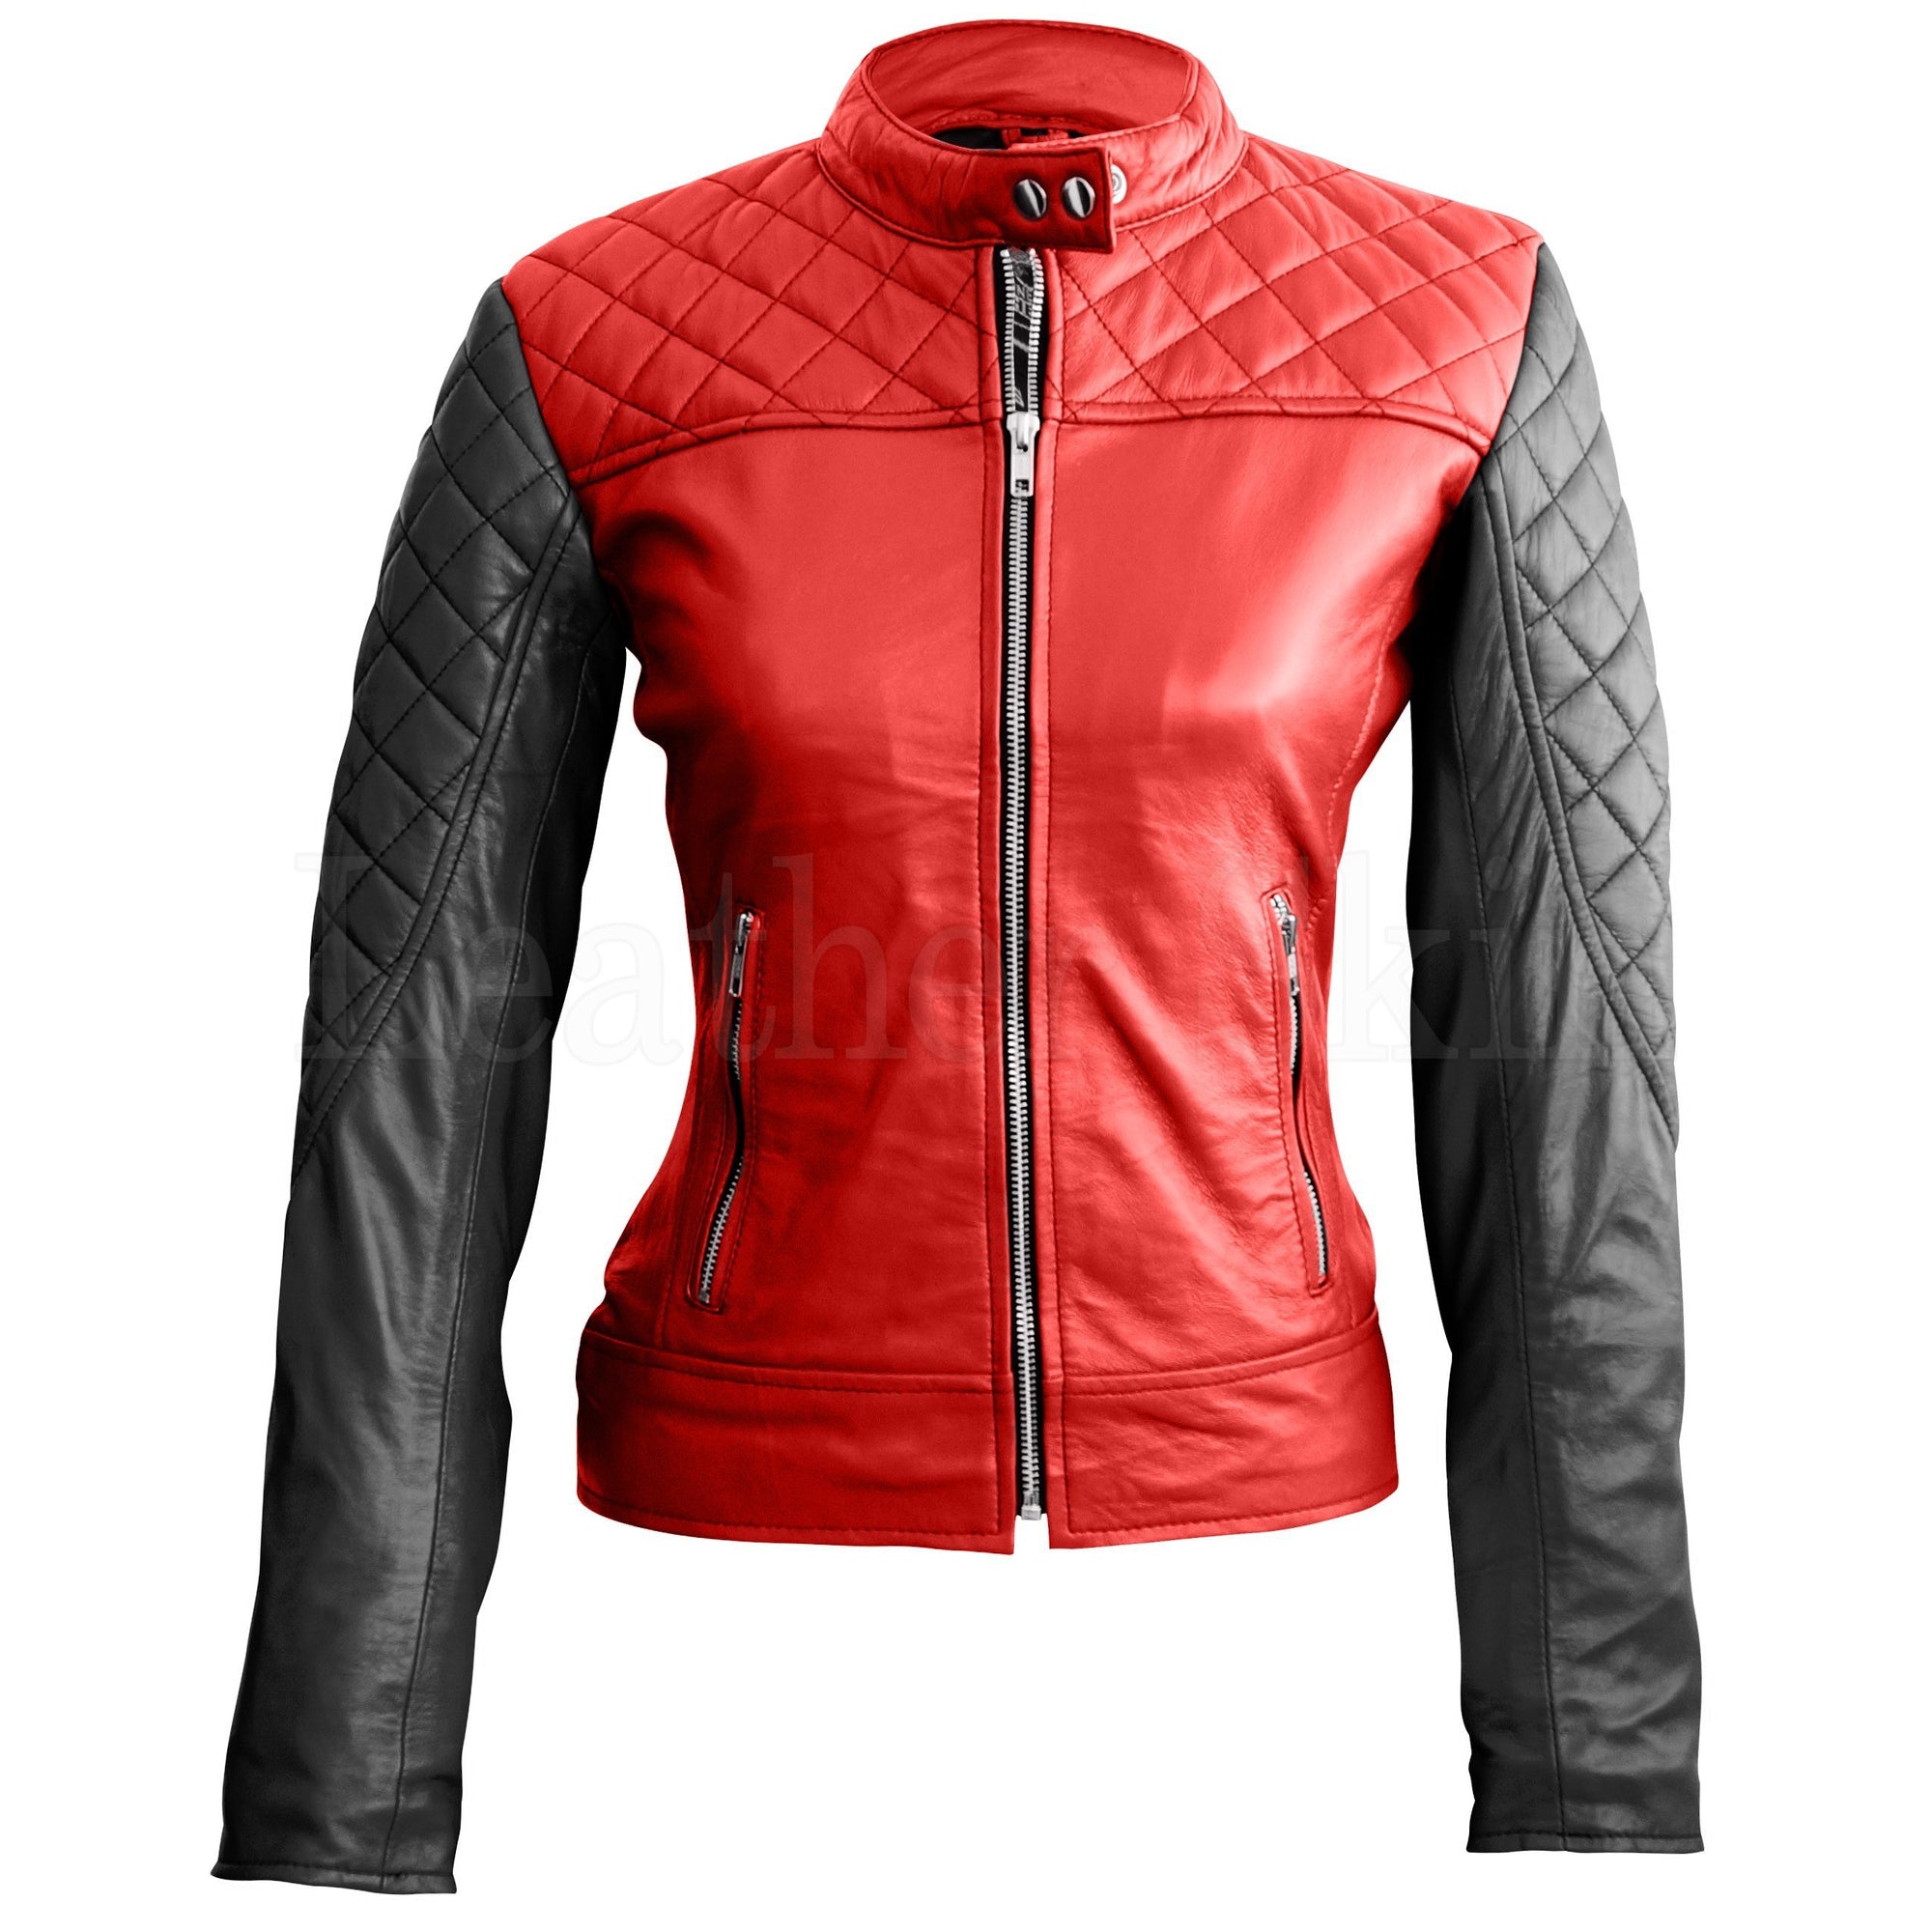 red leather jacket with black sleeves women